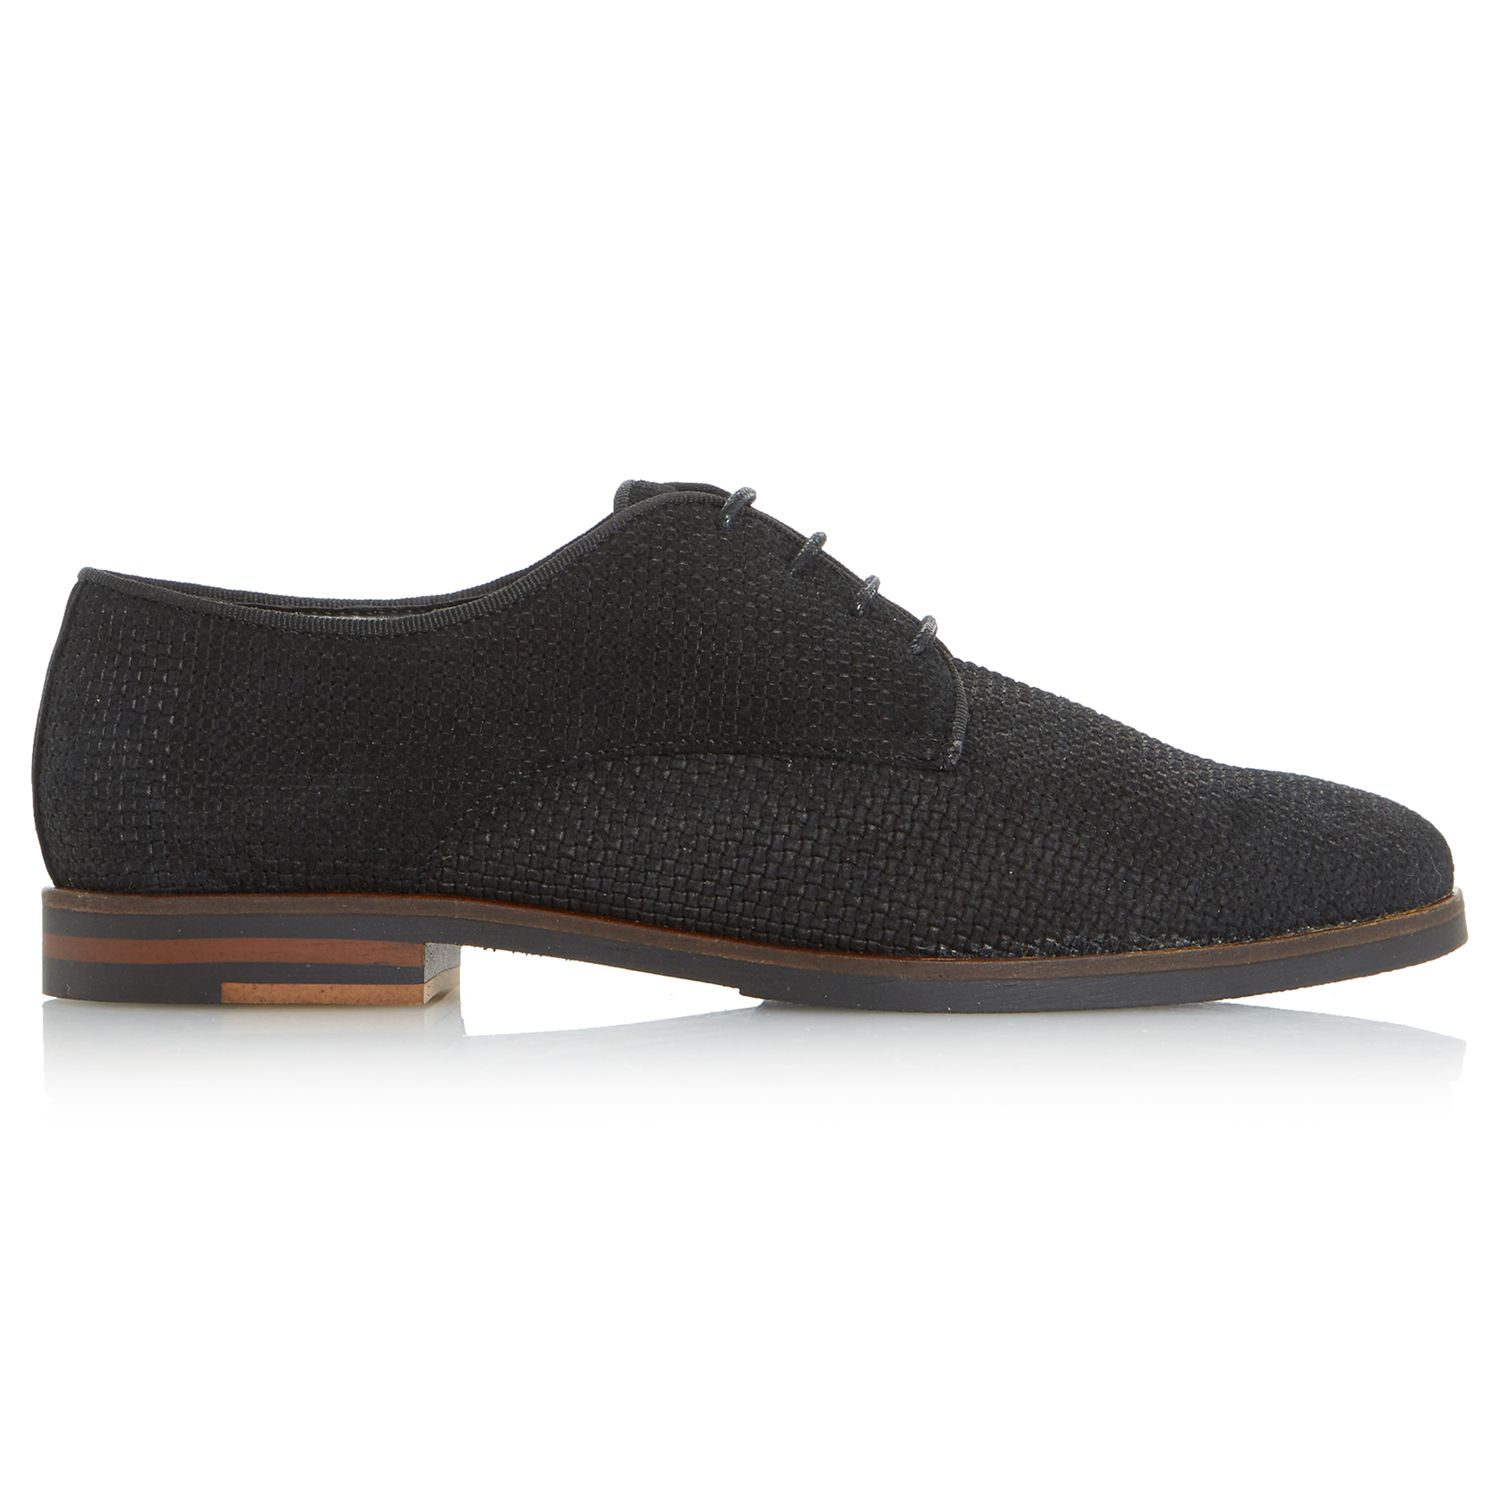 Dune Fadia Lace Up Brogues, Black, 3